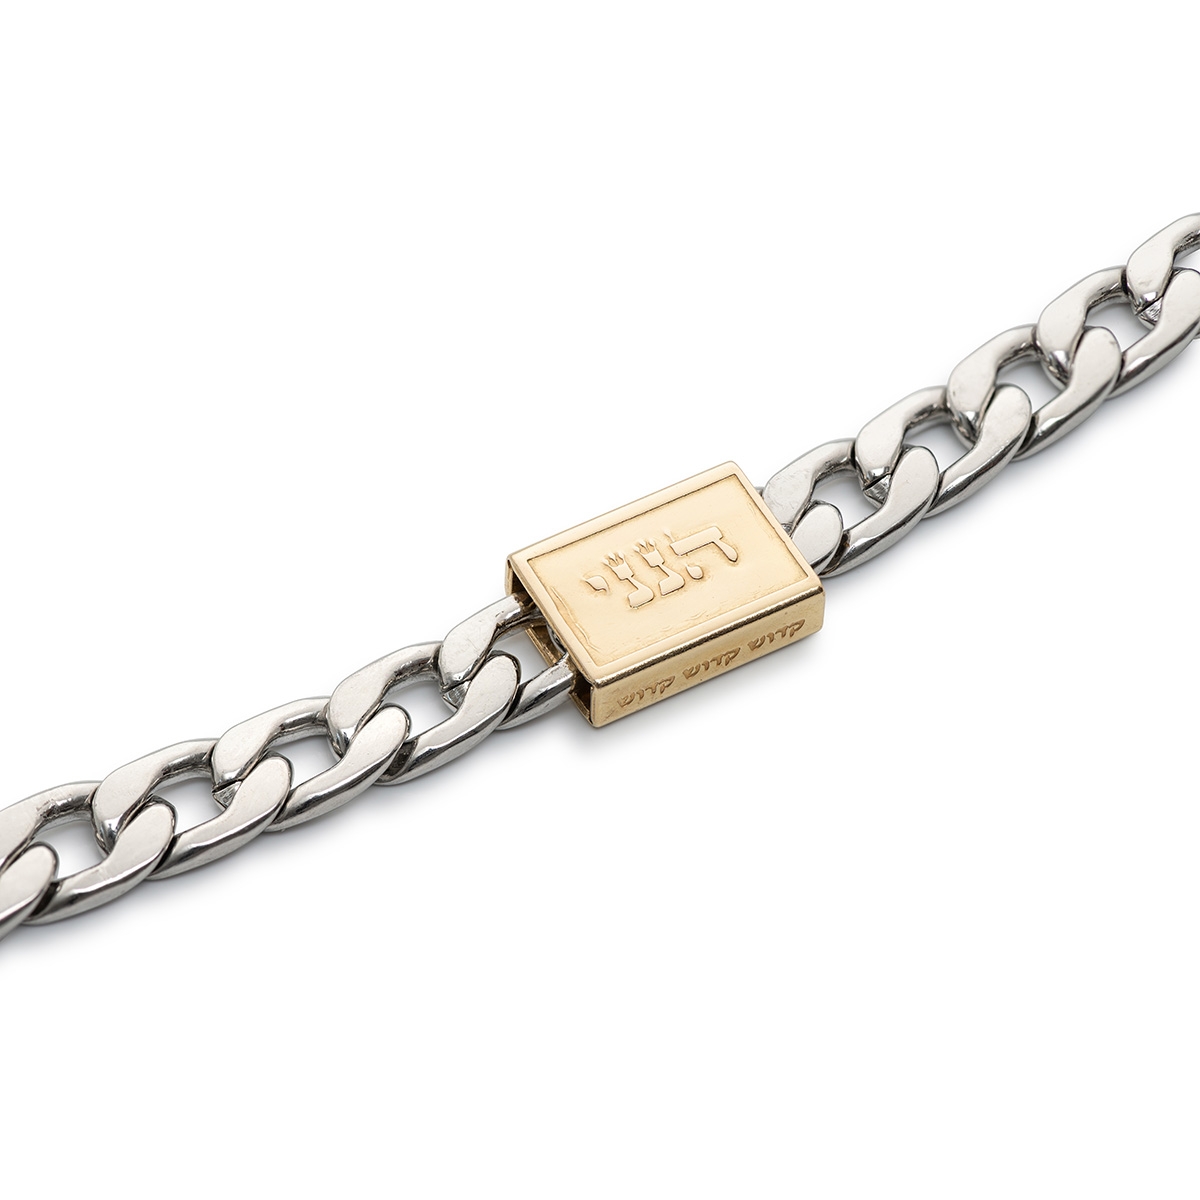 Men's Stainless Steel Chain Bracelet with Gold-Plated Hineni Pendant - 1